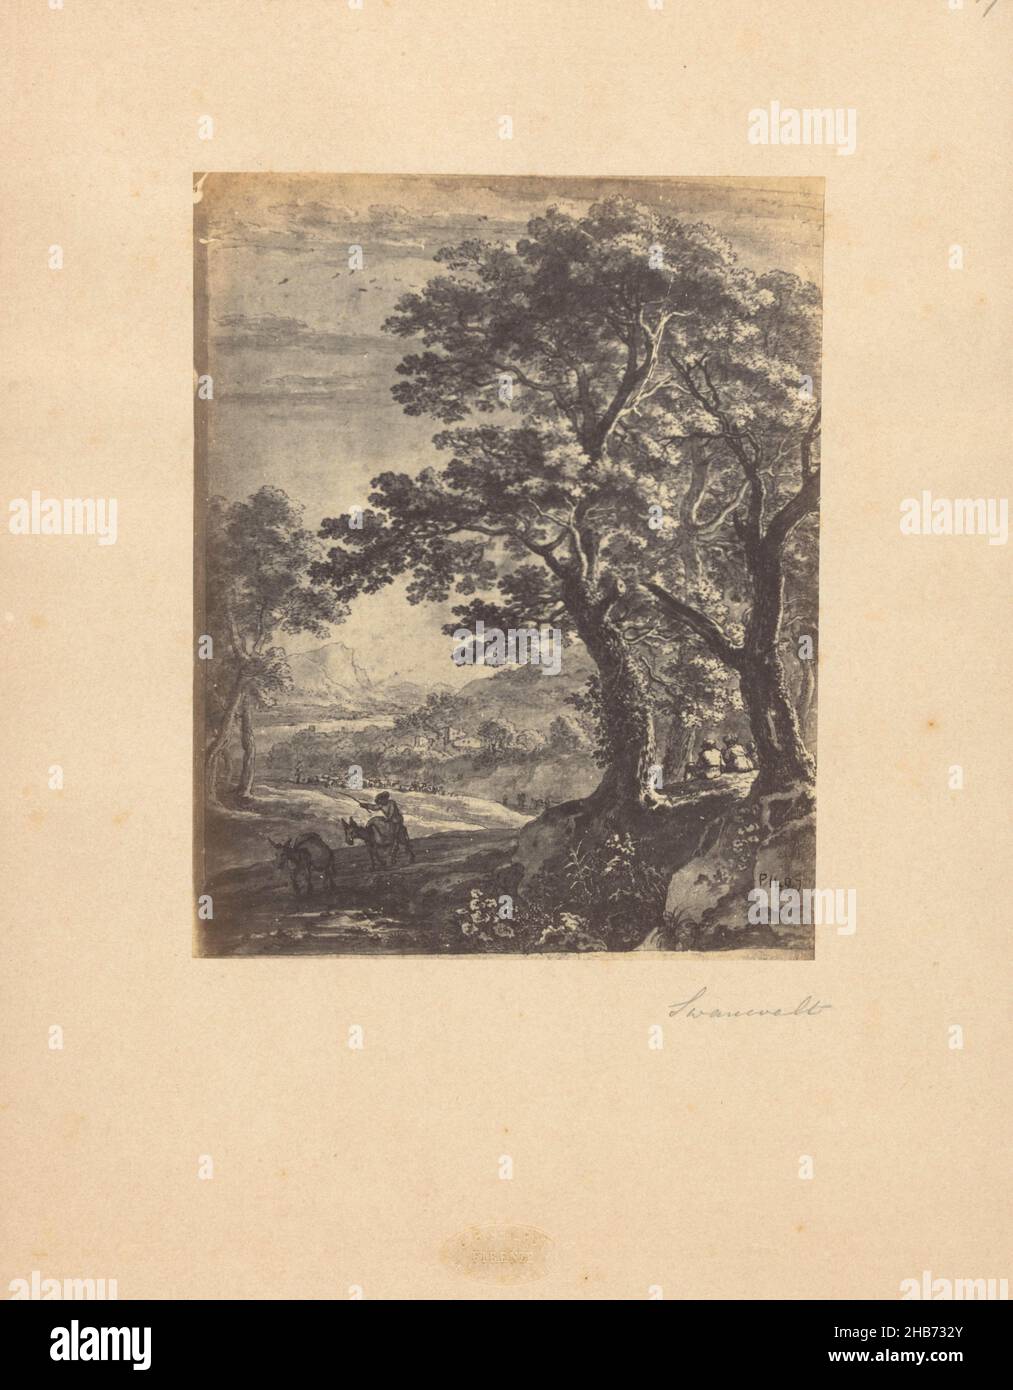 Photoreproduction of a drawing of an Italian landscape by Herman van Swanevelt, Giovanni Brampton Philpot (mentioned on object), intermediary draughtsman: Herman van Swanevelt (mentioned on object), Florence, 1851 - 1878, paper, cardboard, albumen print, height 182 mm × width 145 mmheight 326 mm × width 249 mm Stock Photo